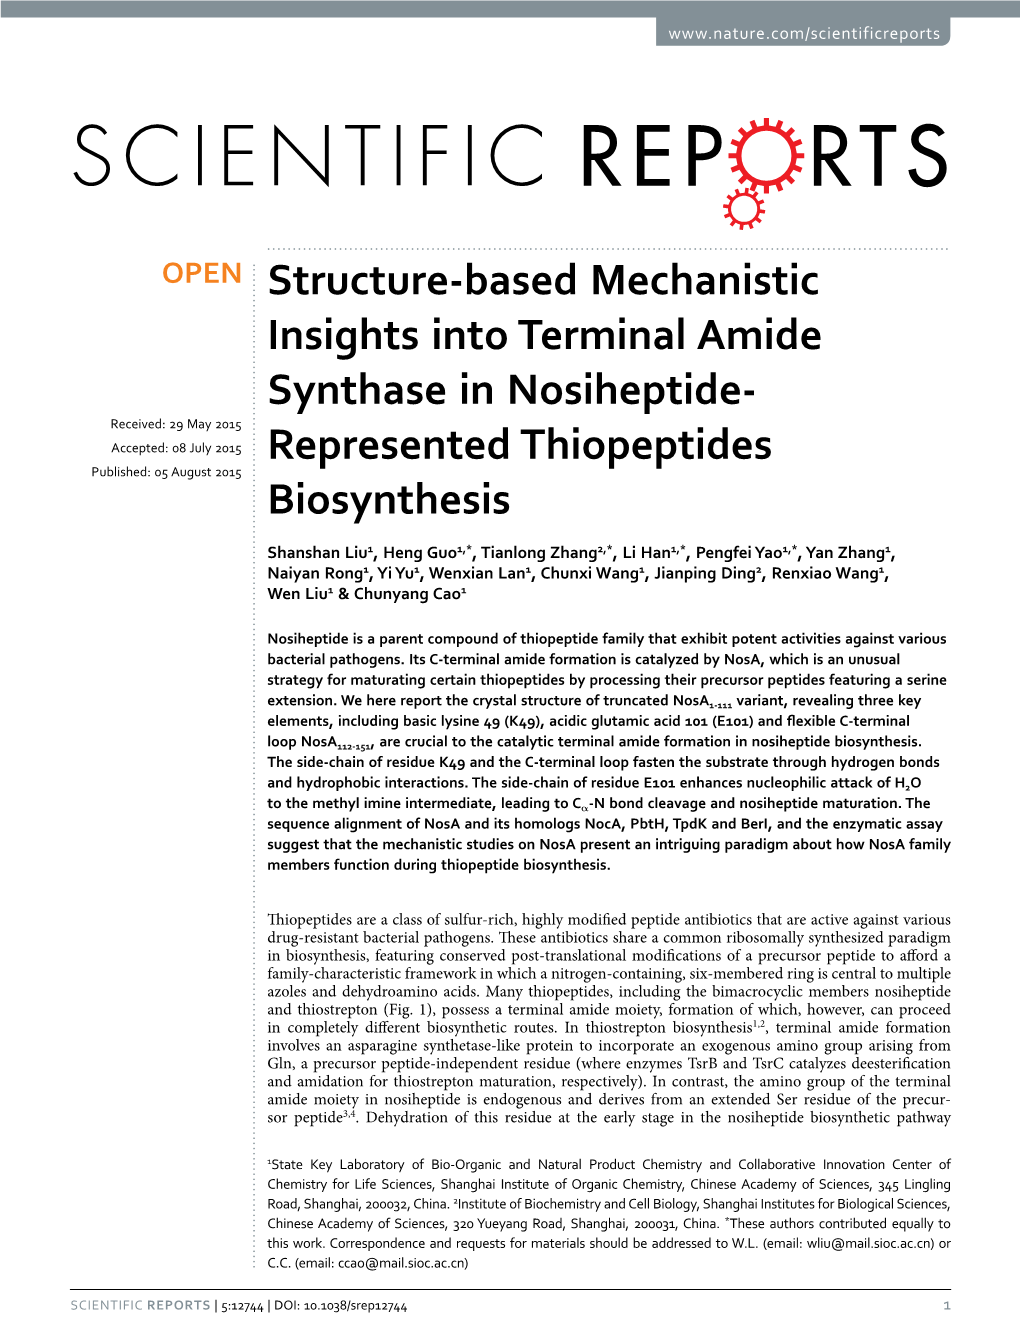 Structure-Based Mechanistic Insights Into Terminal Amide Synthase In